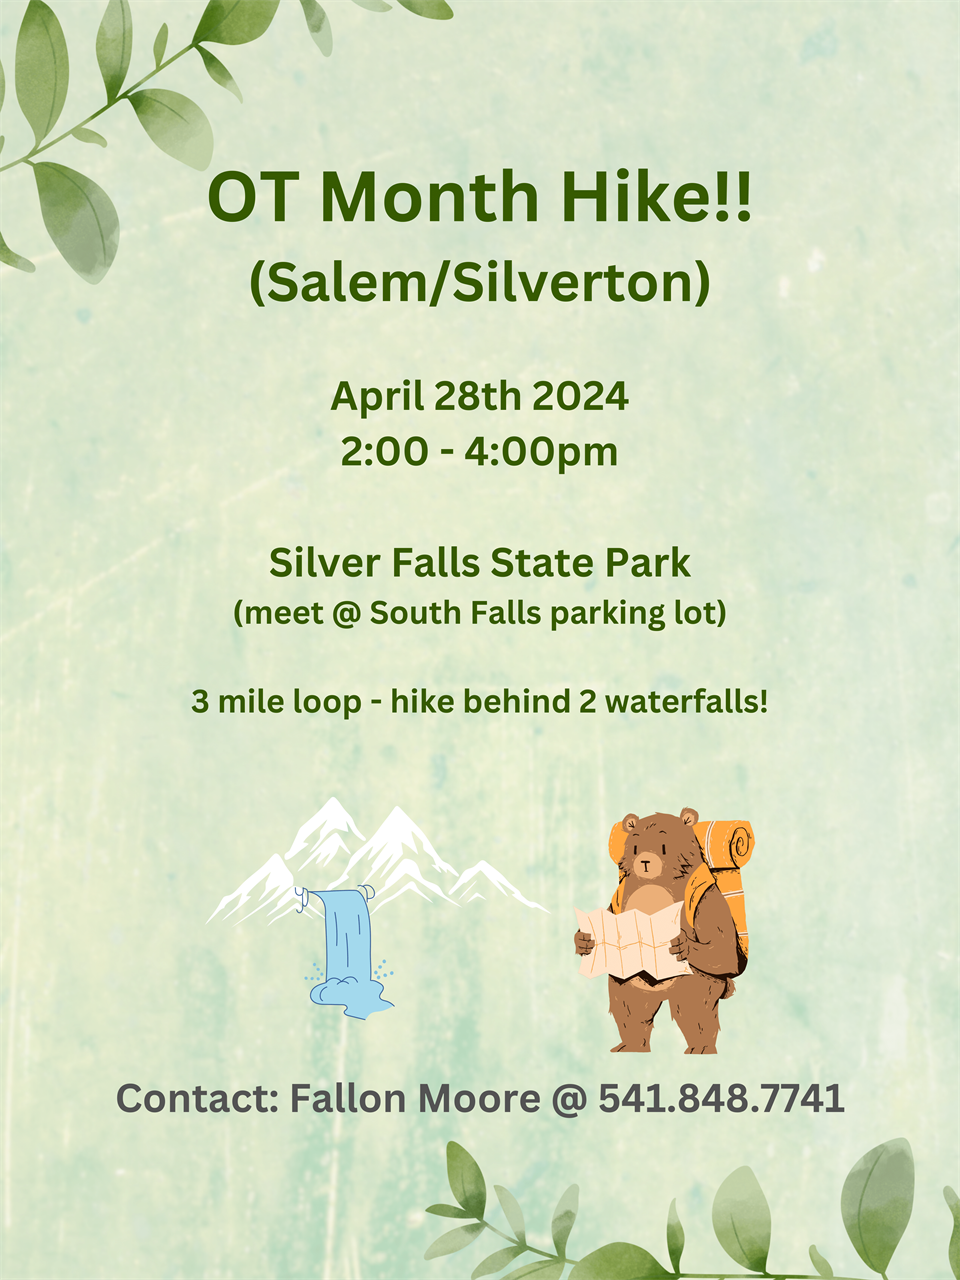 A light green flyer that reads "OT Month Hike!! (Salem/Silverton). April 28th 2024 2:00-4:00pm. Silver Falls State Park (meet @ South Falls parking lot). 3 mile loop-hike behind 2 waterfalls!. Contact Fallon Moore @ 541.848.7741. A cartoon picture of a waterfall and bear with a hiking backpack are at the bottom. 